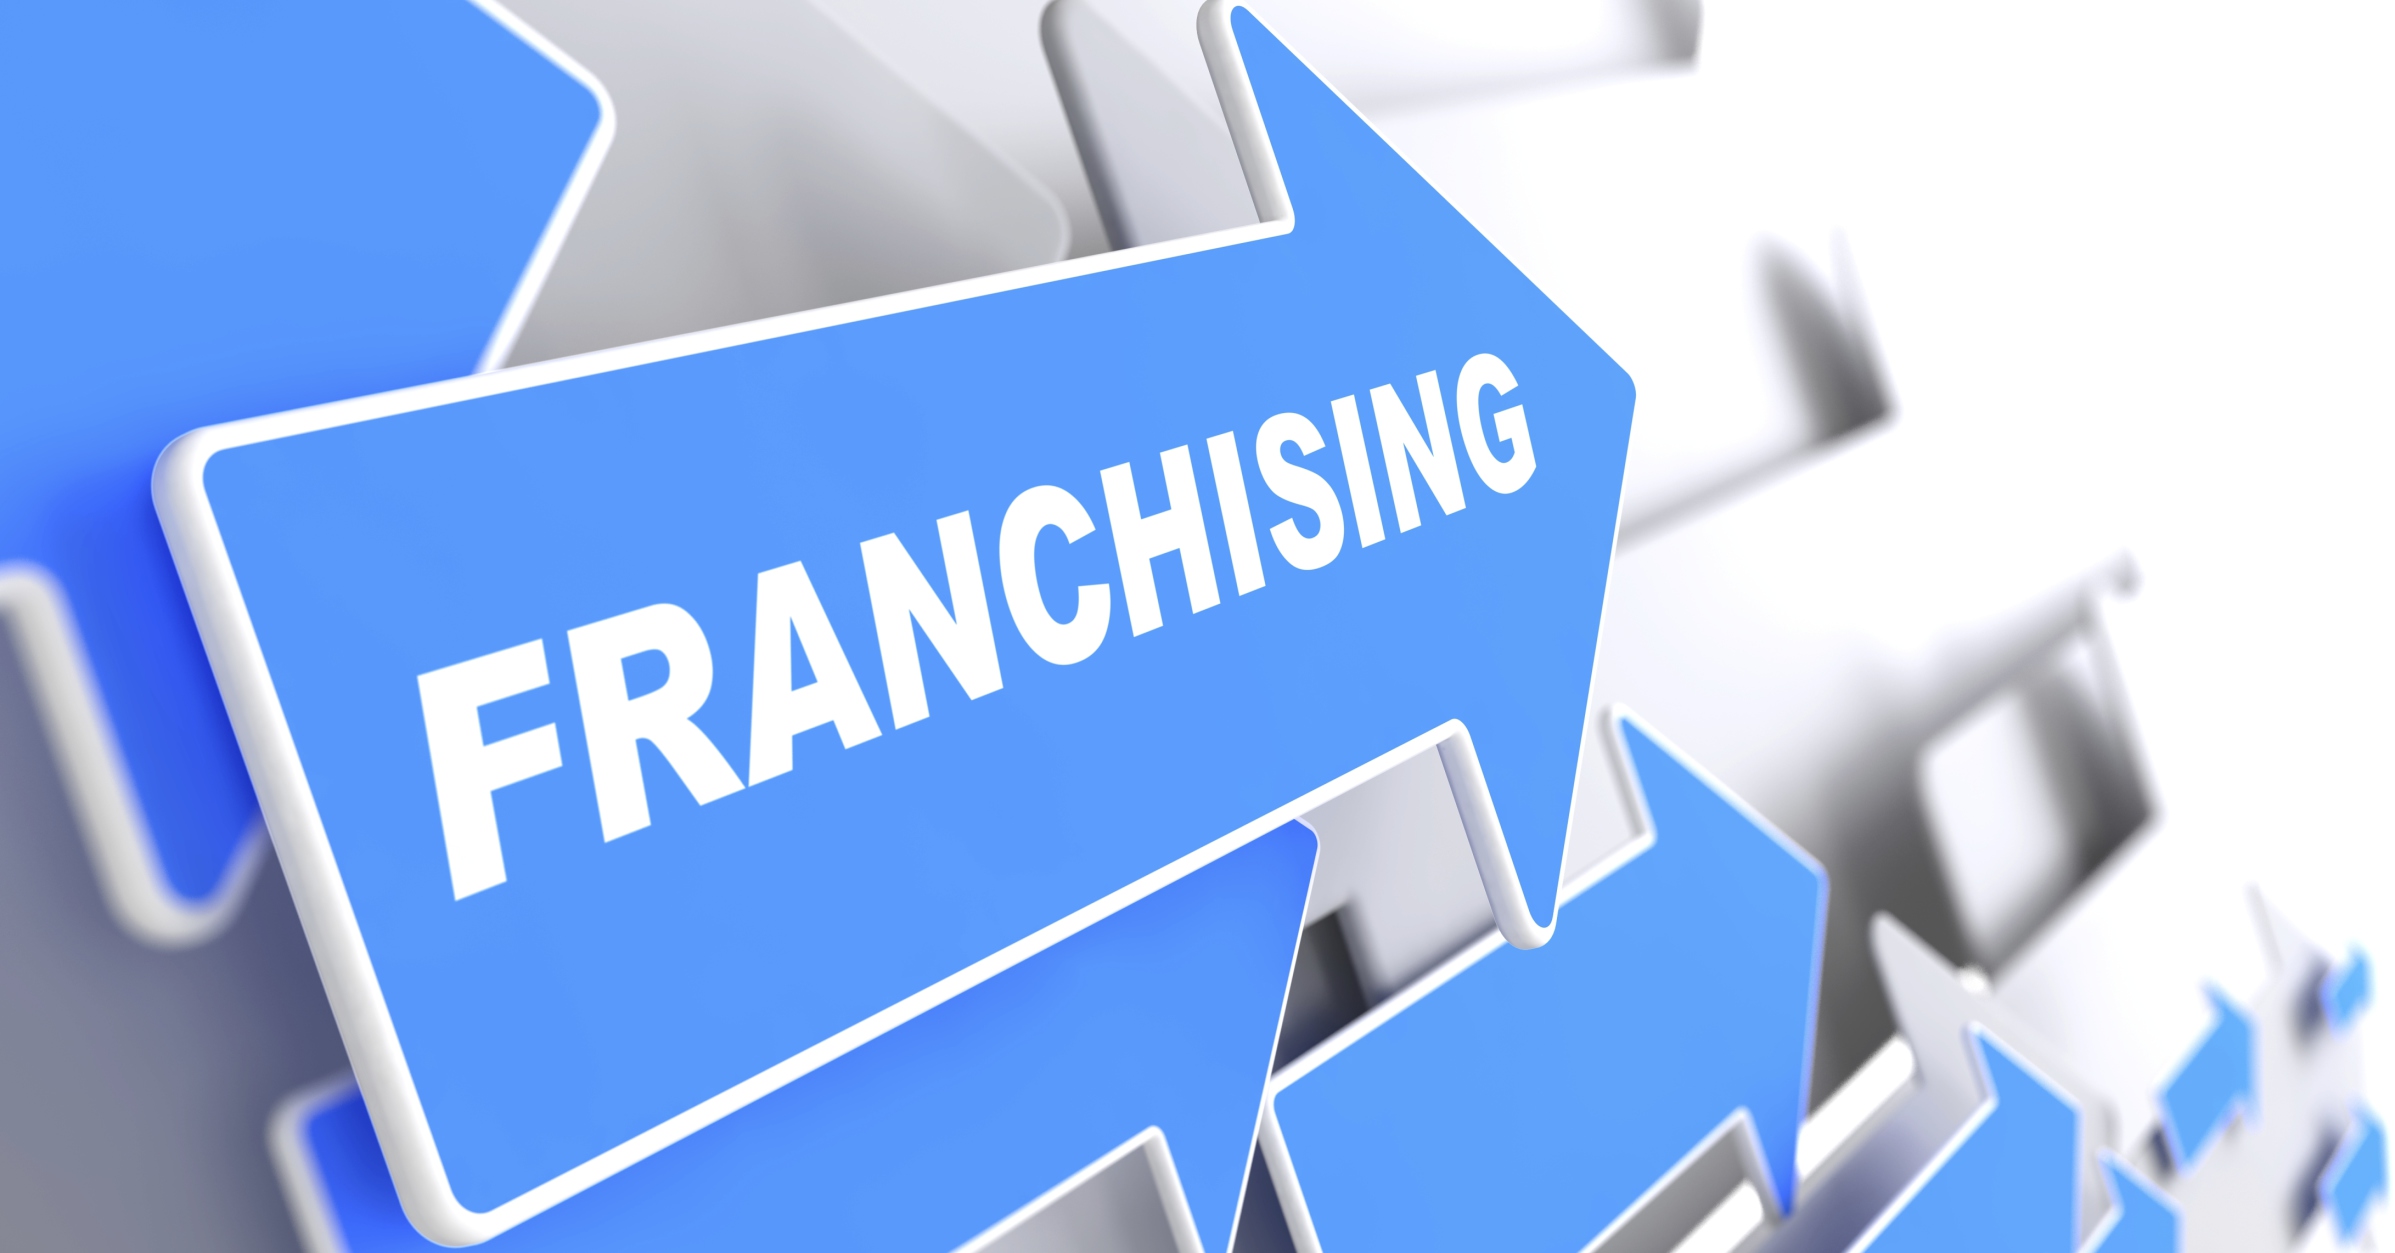 Franchising and blue arrows